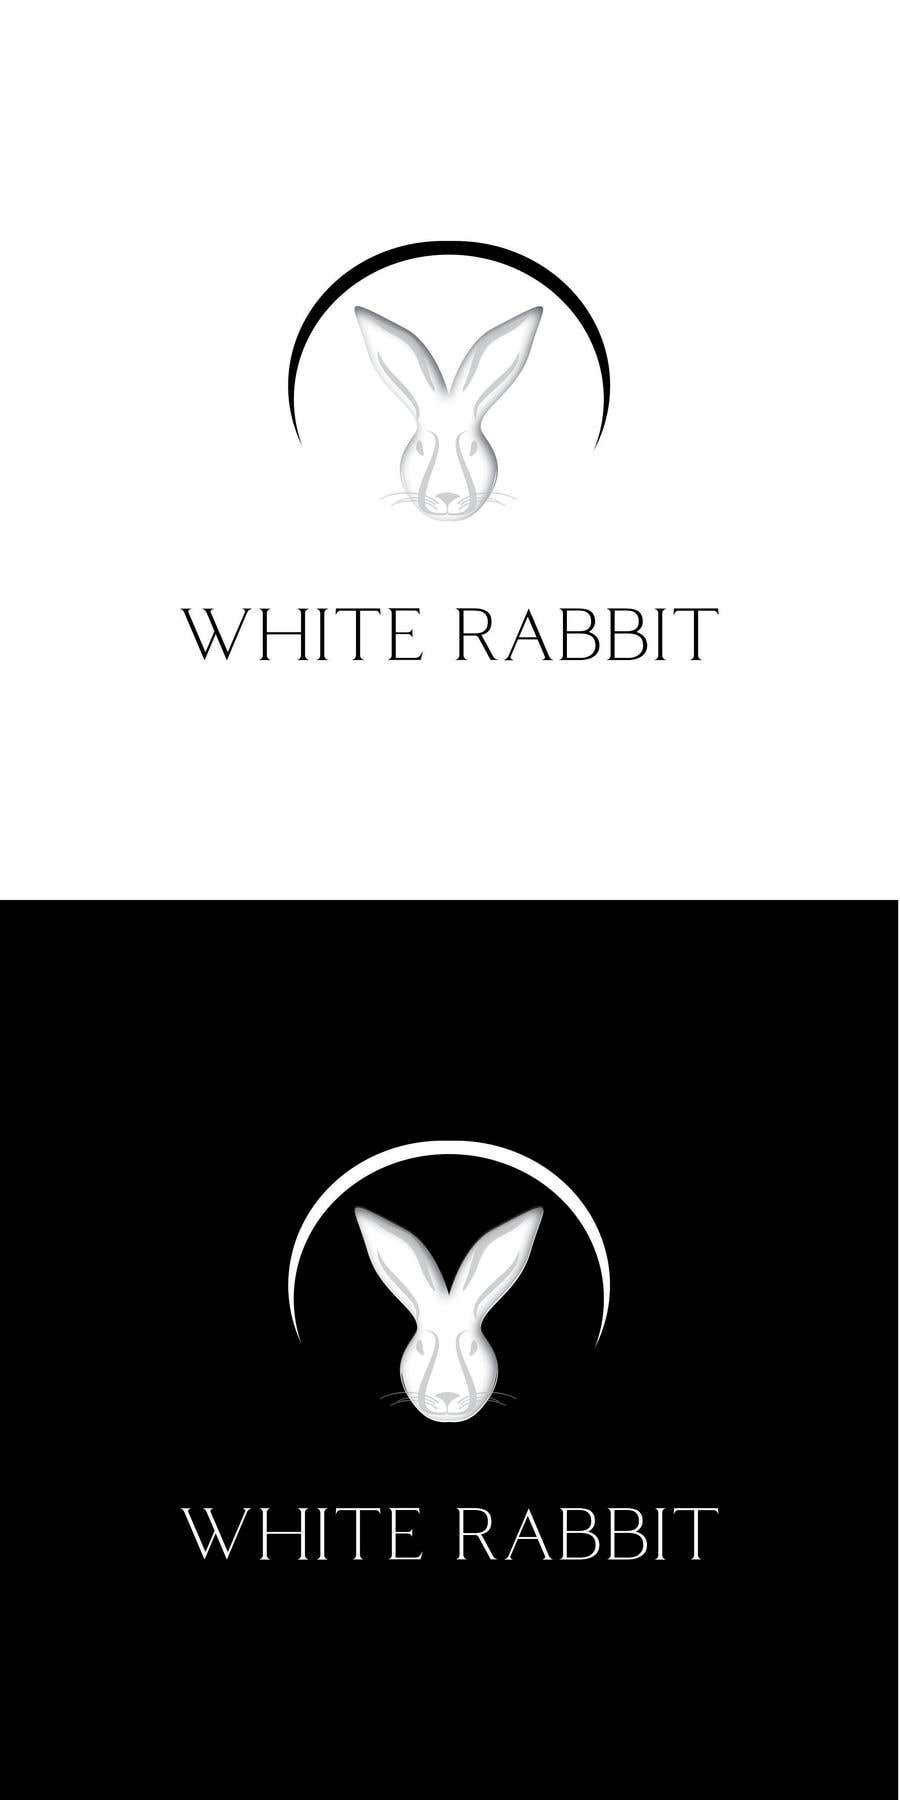 Proposition n°2 du concours                                                 A professional, original, creative design of a white rabbit to be used in a poster of a show called White Rabbit.
                                            